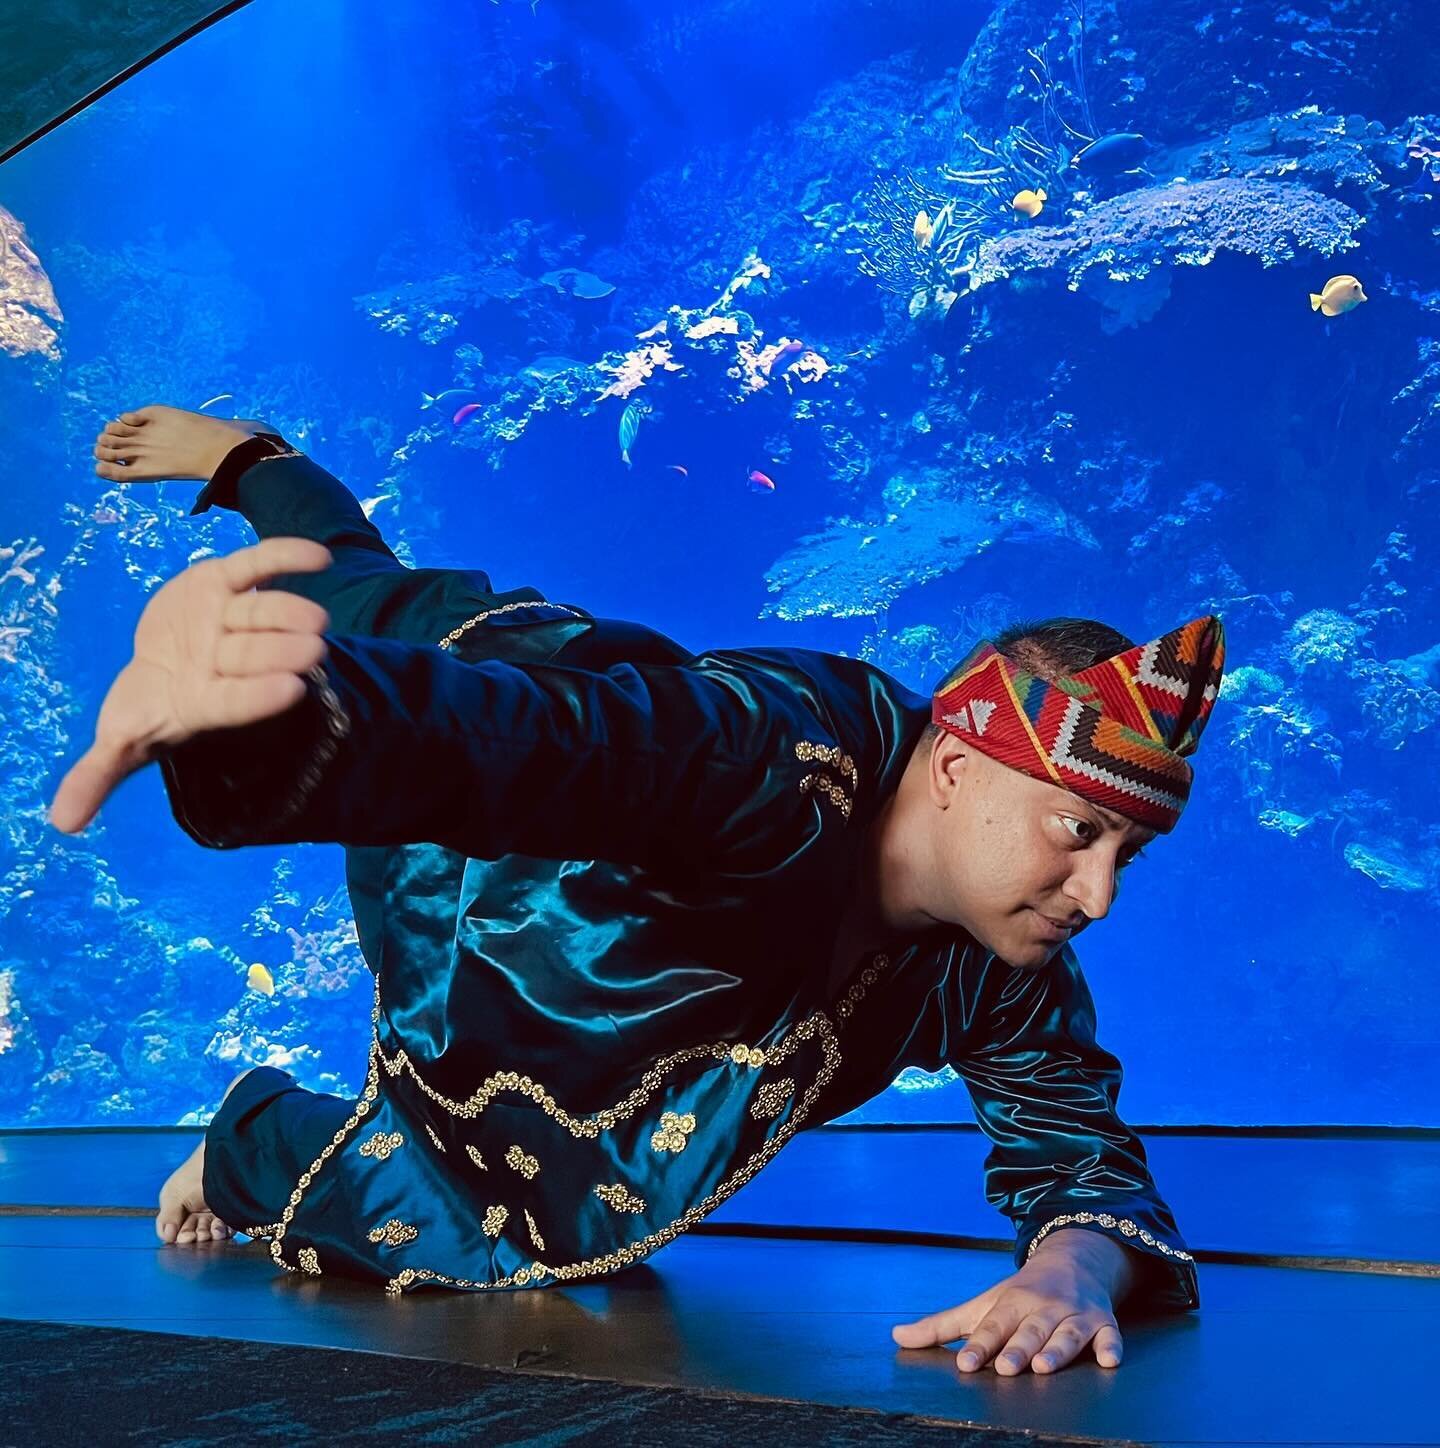 Last weekend we shared a glimpse of the Pulse of Pangalay at the Aquarium of the Pacific in Long Beach for the Autumn festival.  We felt the affinity between pangalay and the aquarium as we danced to the kulintangan evoking the surrounding sea.  A bo